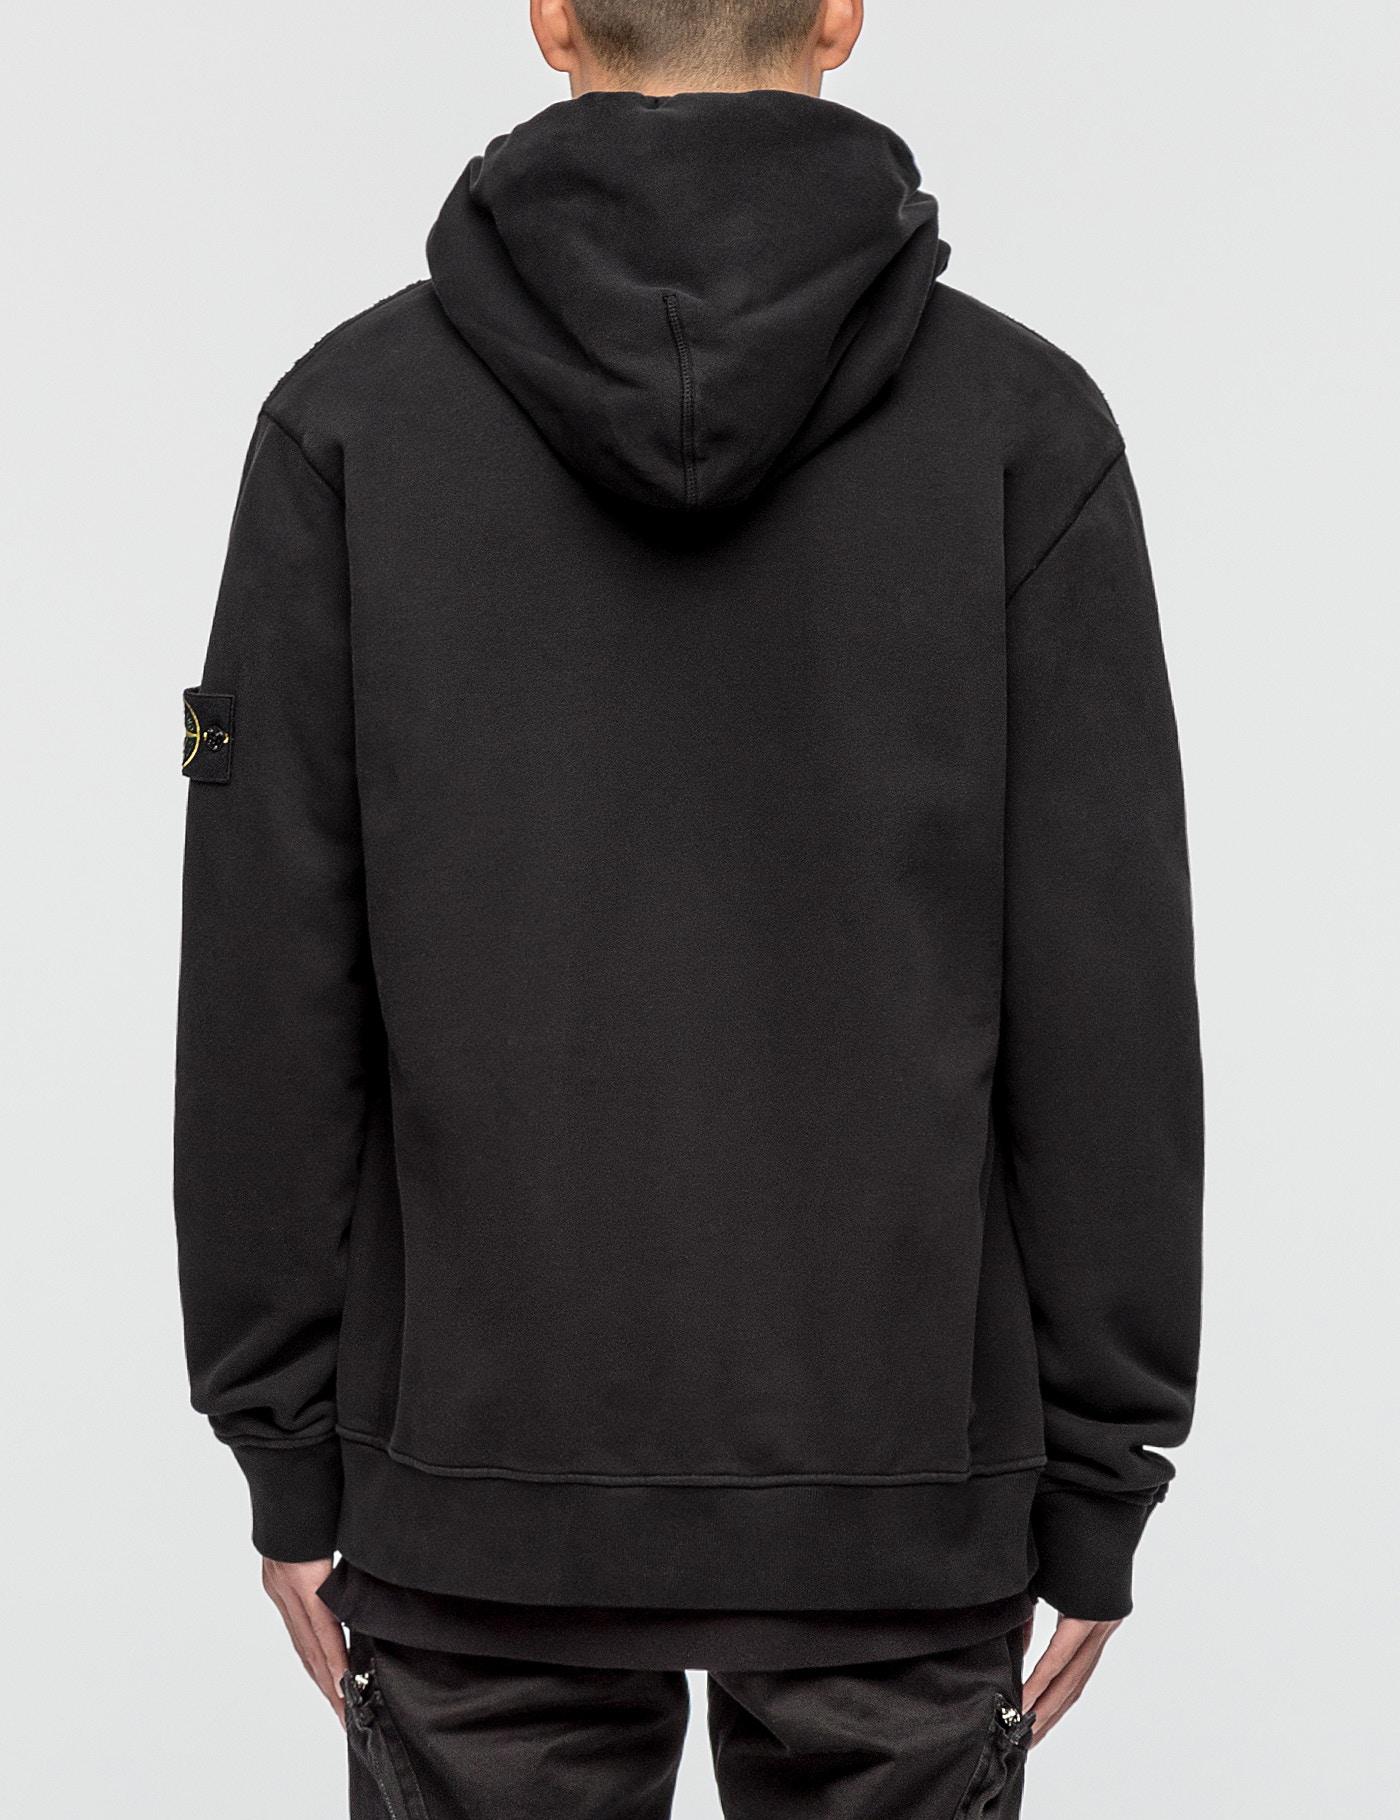 Stone Island Cotton Garment Dyed Zip Hoodie in Black for Men - Lyst